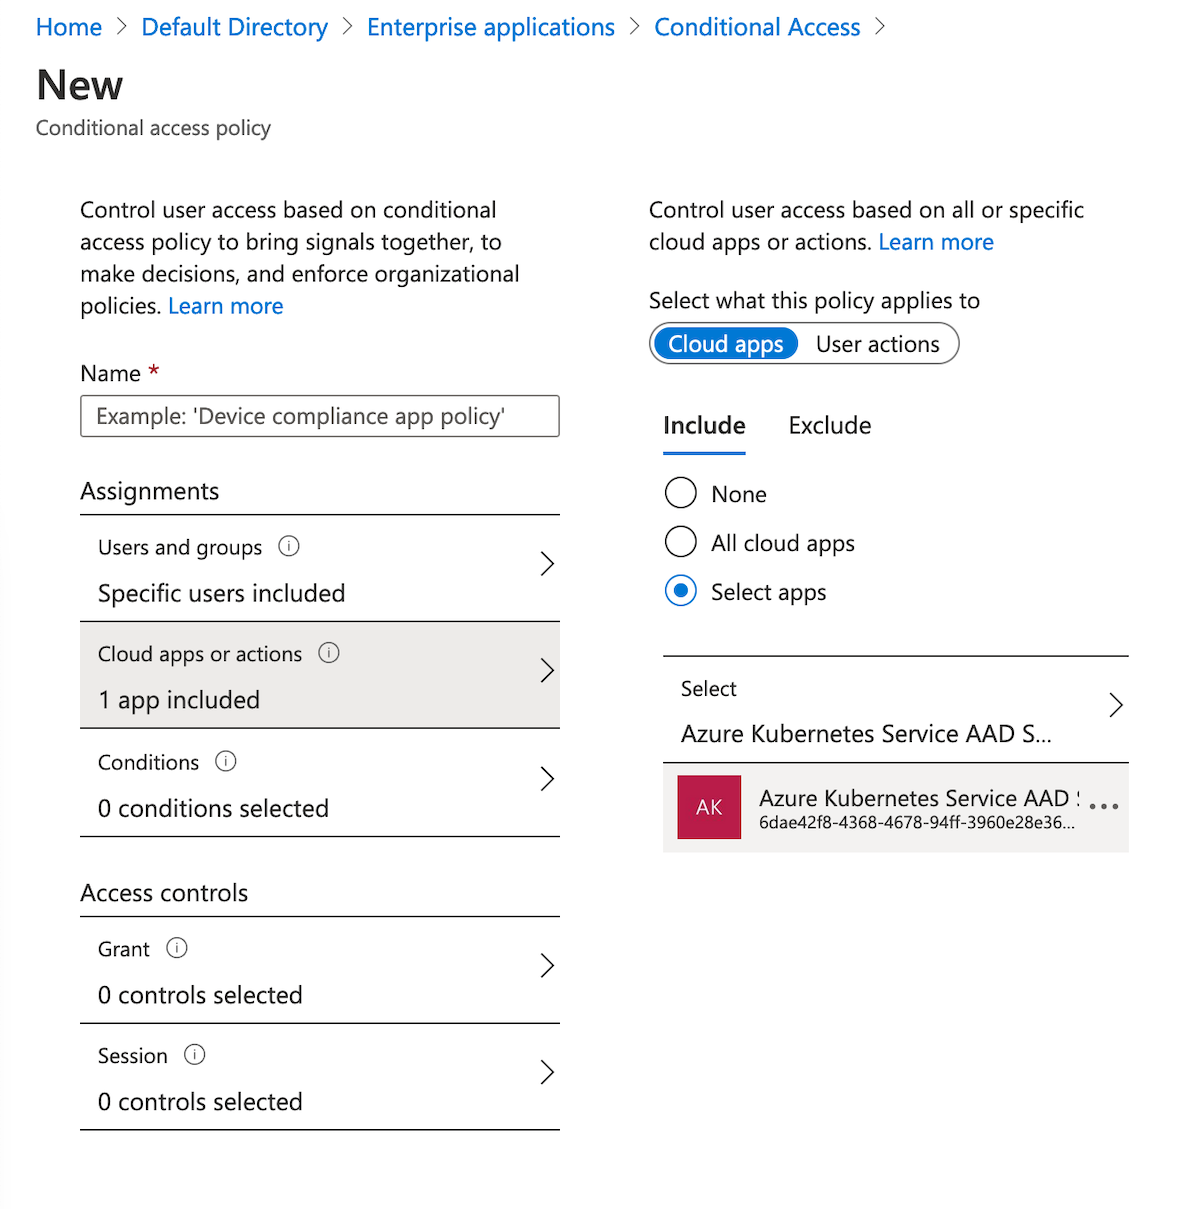 Screenshot of selecting Azure Kubernetes Service AD Server for applying the Conditional Access policy.